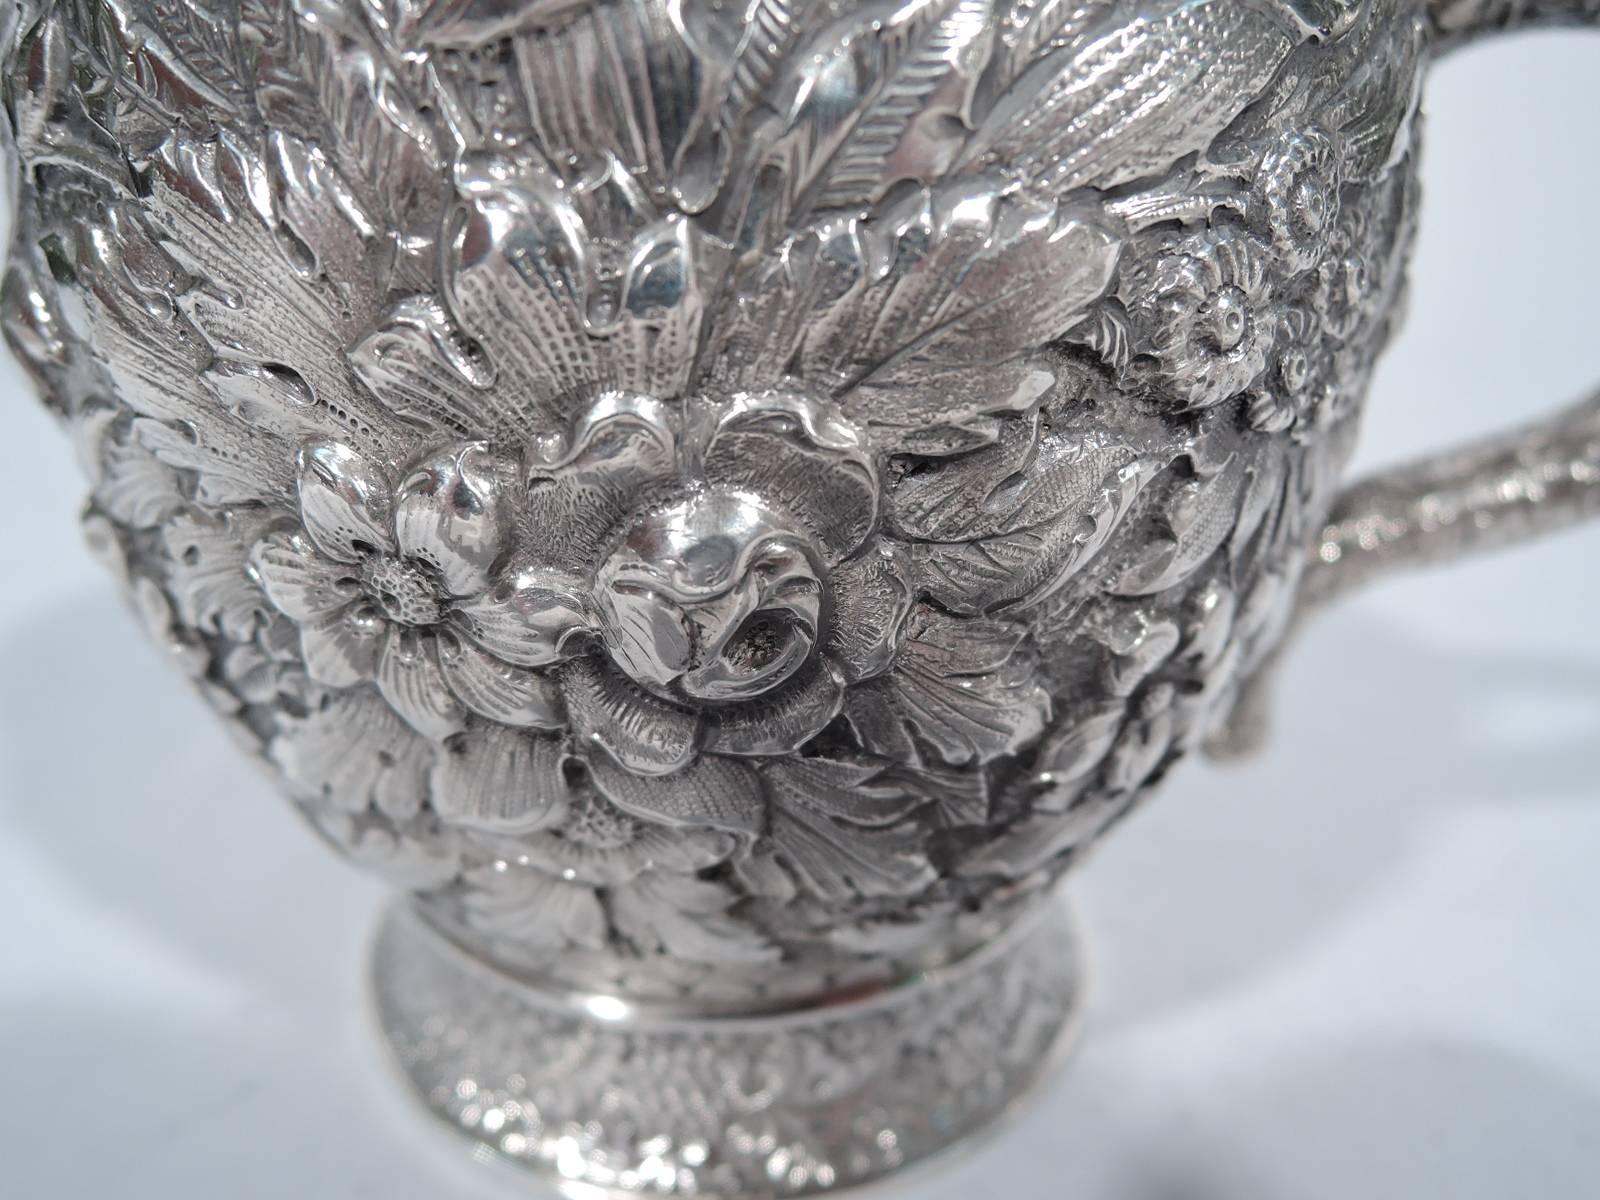 Repoussé Large Antique Sterling Silver Baby Cup with Floral Repoussé by Tiffany